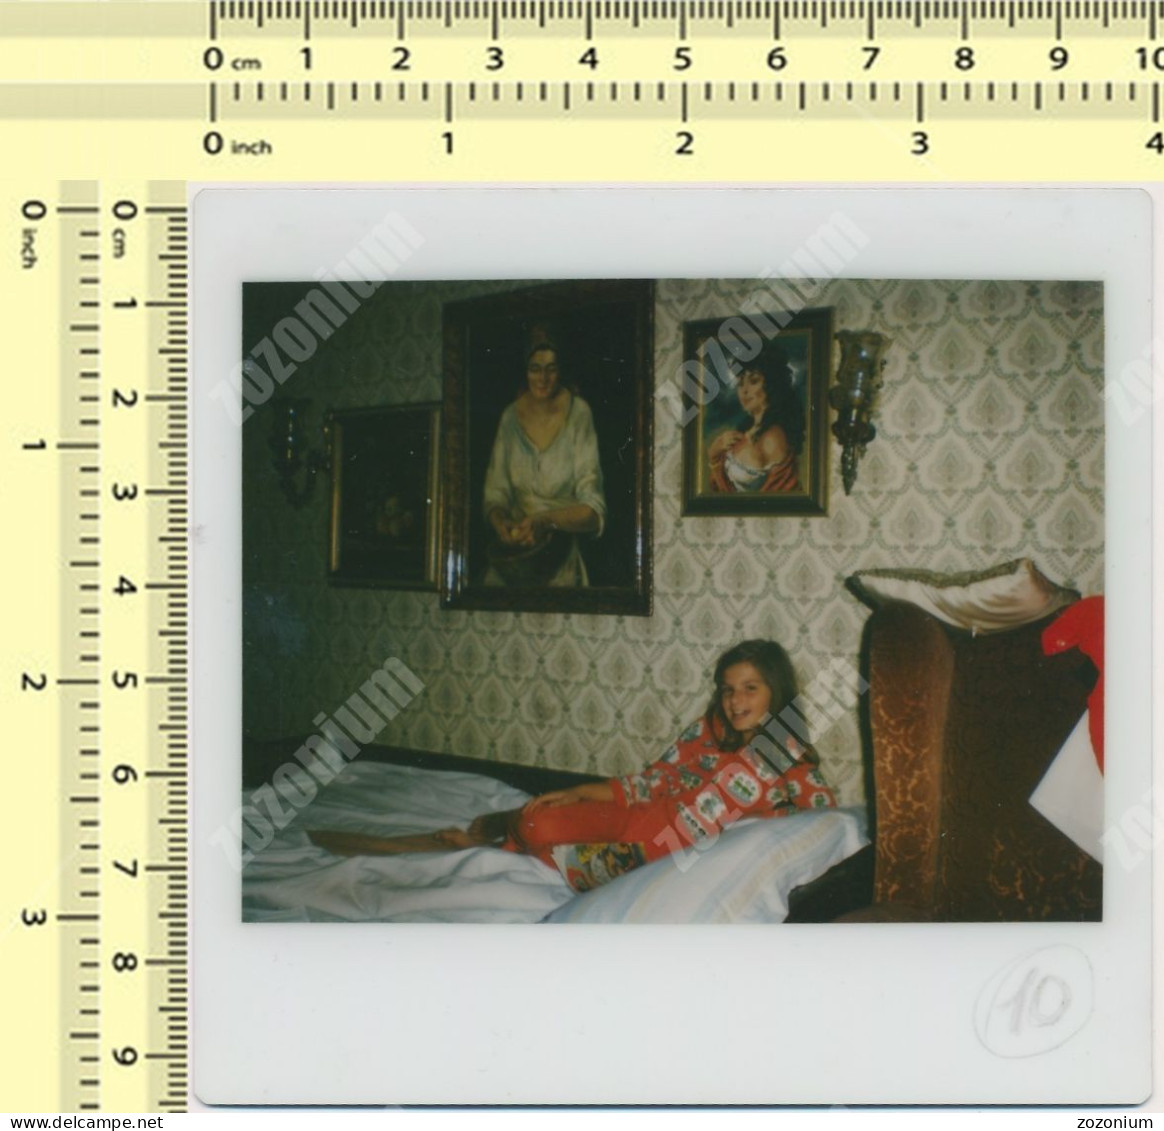 REAL PHOTO KID GIRL IN PAJAMAS ON BED FILLETTE PYJAMA SUR LE LIT, OLD POLAROID PHOTO SNAPSHOT - Personnes Anonymes